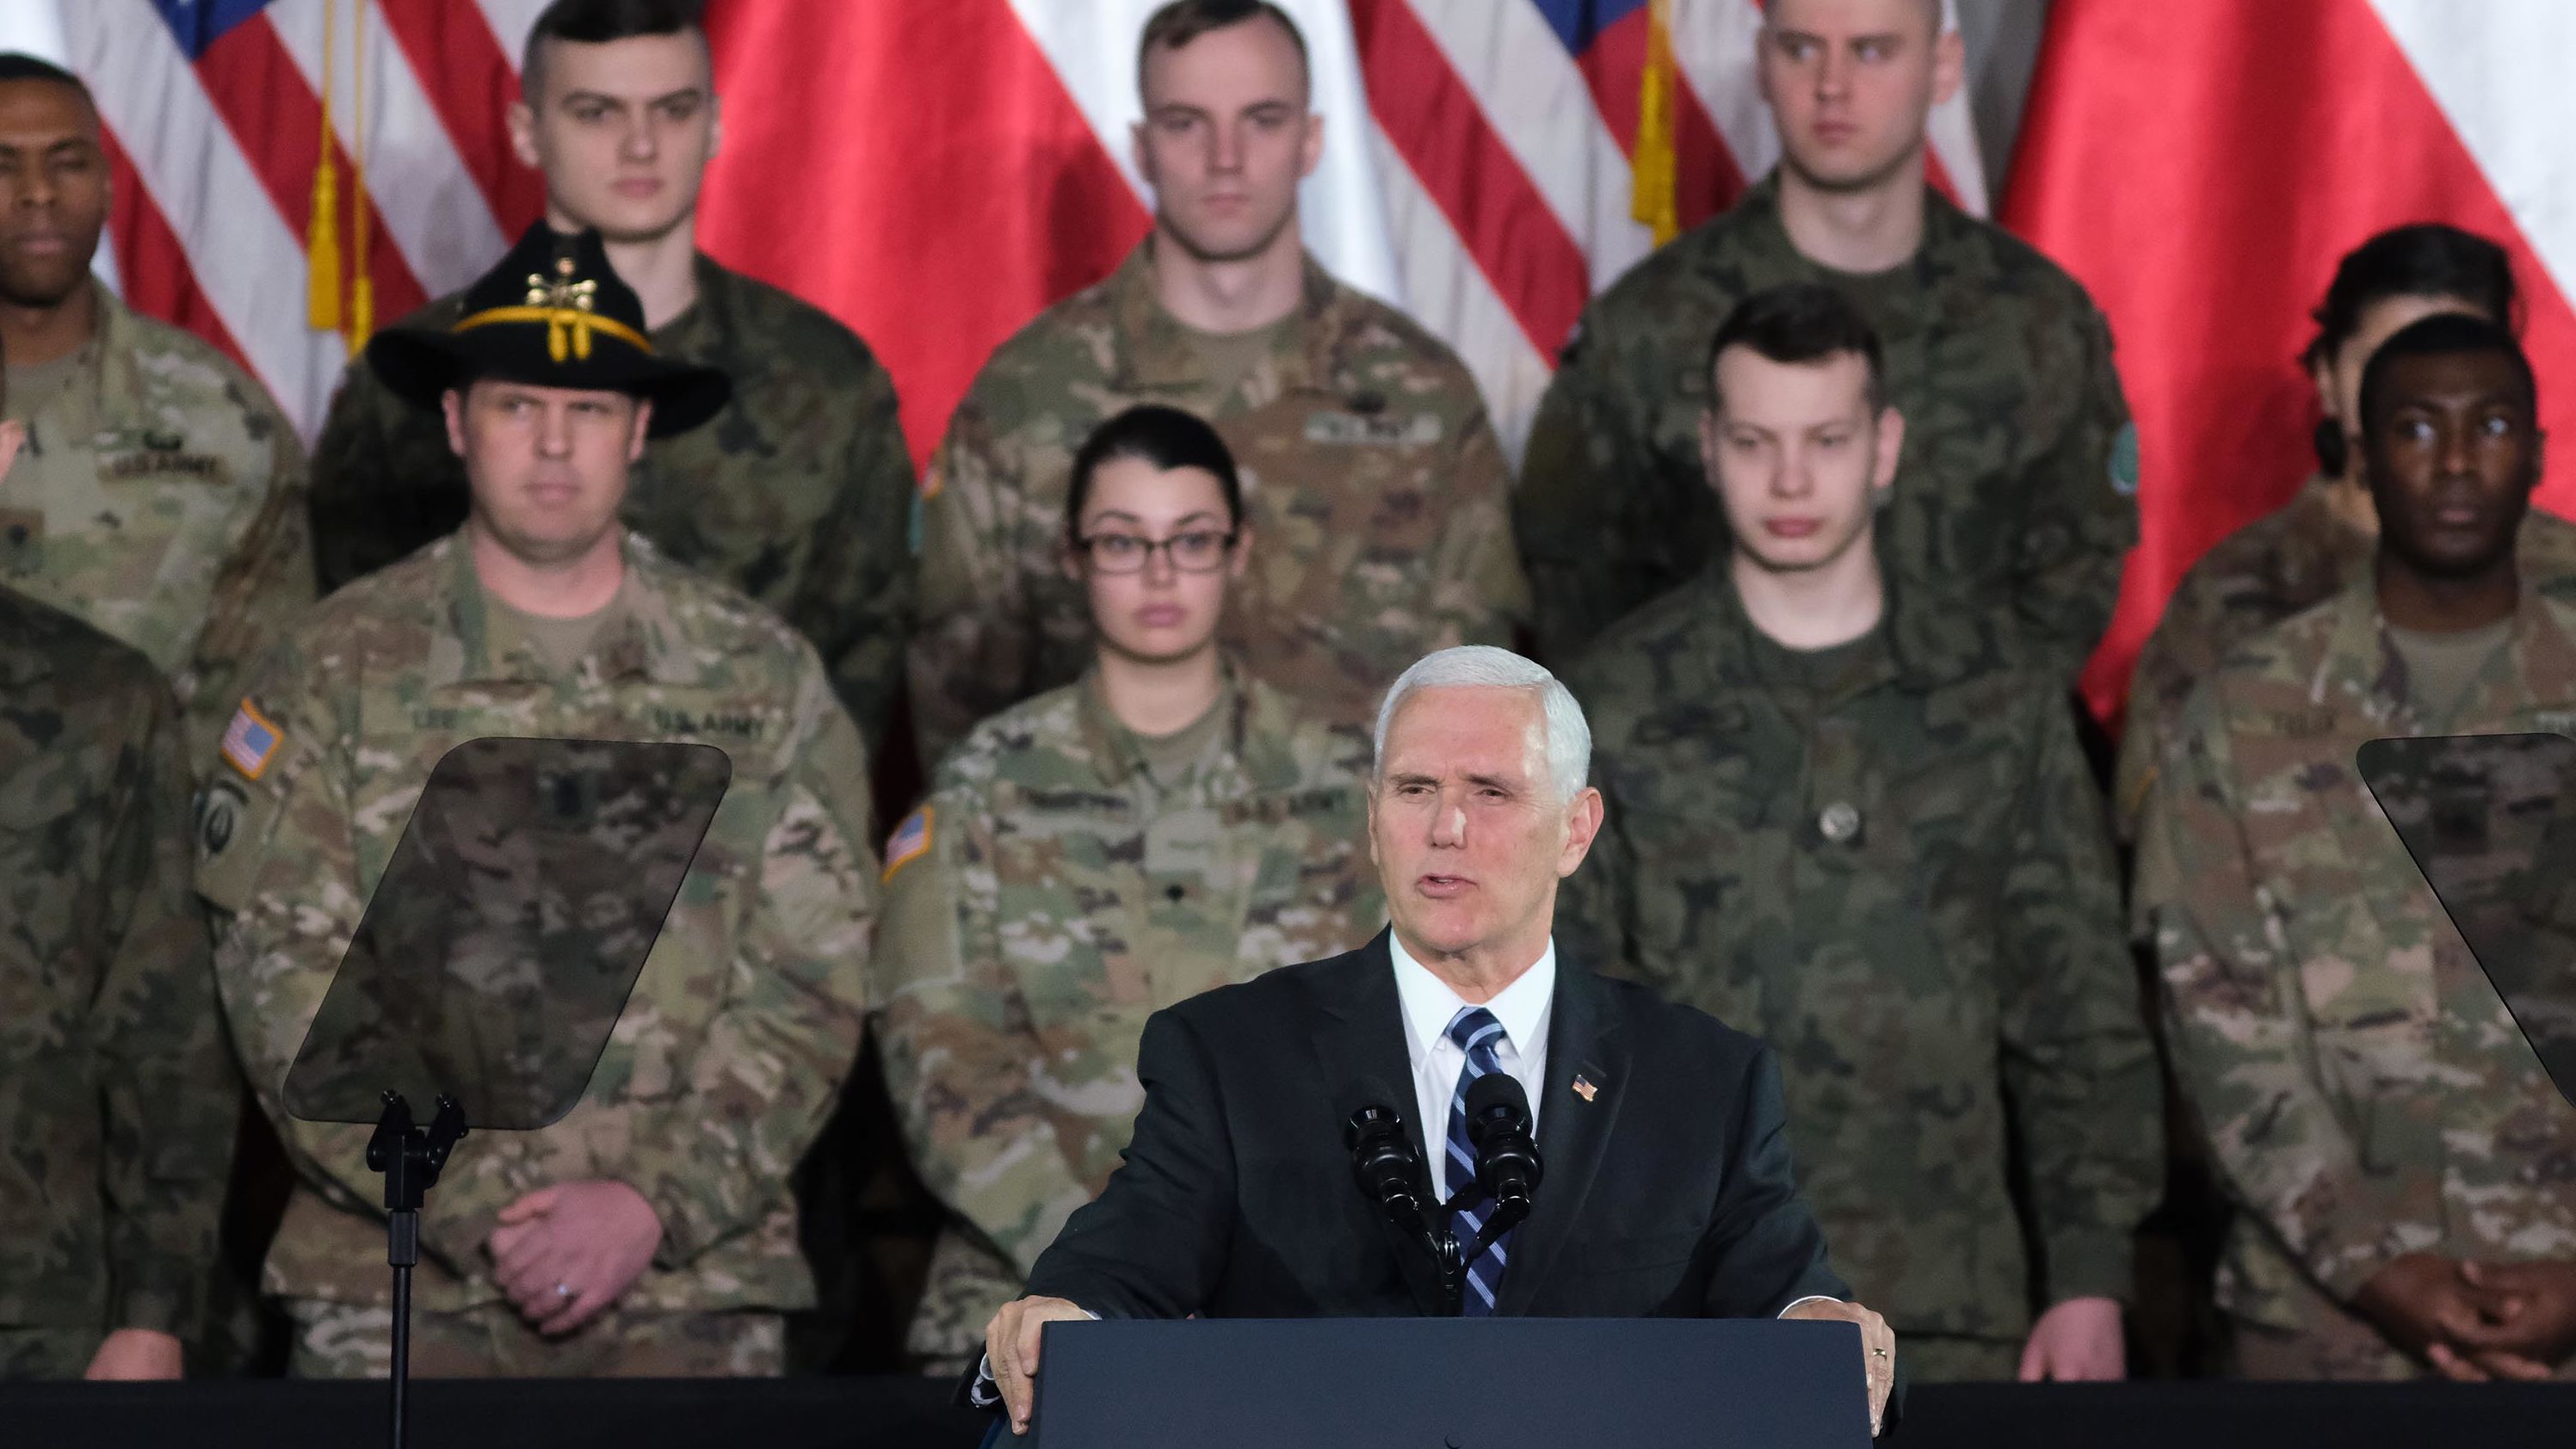 Pence speaks while visiting US and Polish soldiers at a military base in Warsaw, Poland, in February 2019.